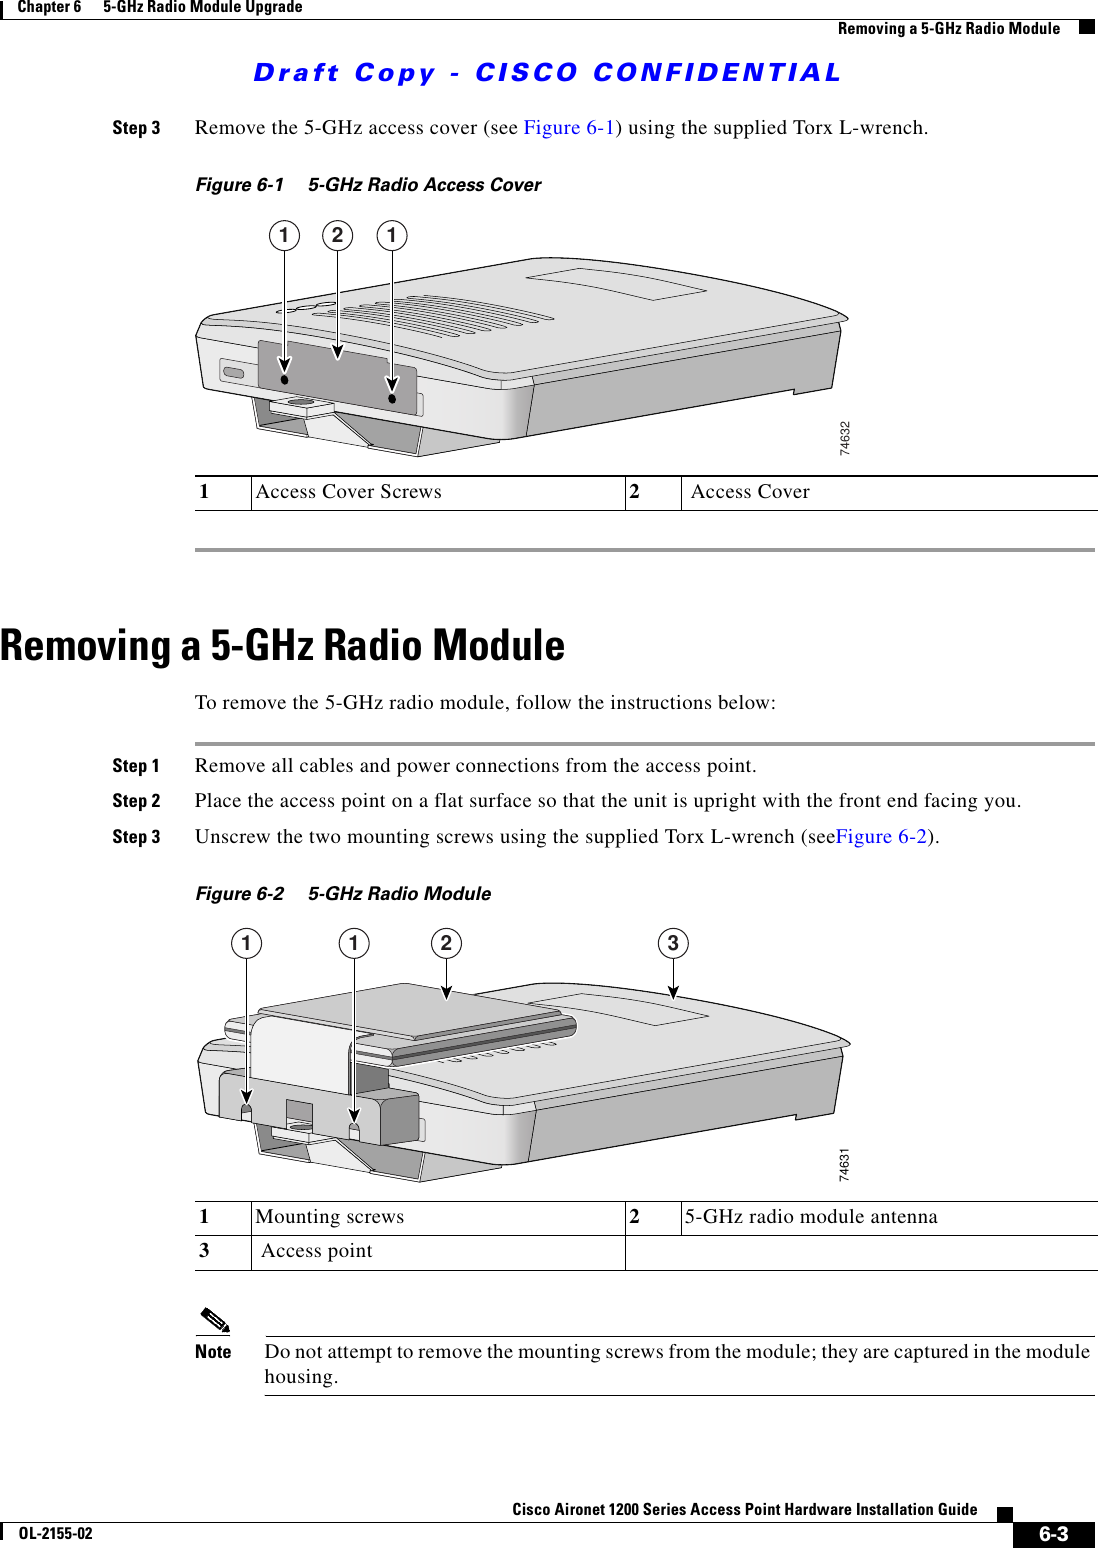 Draft Copy - CISCO CONFIDENTIAL 6-3Cisco Aironet 1200 Series Access Point Hardware Installation GuideOL-2155-02Chapter 6      5-GHz Radio Module UpgradeRemoving a 5-GHz Radio ModuleStep 3 Remove the 5-GHz access cover (see Figure 6-1) using the supplied Torx L-wrench.Figure 6-1 5-GHz Radio Access CoverRemoving a 5-GHz Radio ModuleTo remove the 5-GHz radio module, follow the instructions below:Step 1 Remove all cables and power connections from the access point.Step 2 Place the access point on a flat surface so that the unit is upright with the front end facing you.Step 3 Unscrew the two mounting screws using the supplied Torx L-wrench (seeFigure 6-2).Figure 6-2 5-GHz Radio Module Note Do not attempt to remove the mounting screws from the module; they are captured in the module housing.1Access Cover Screws 2 Access Cover1 12746321Mounting screws  25-GHz radio module antenna3 Access point746311 1 2 3